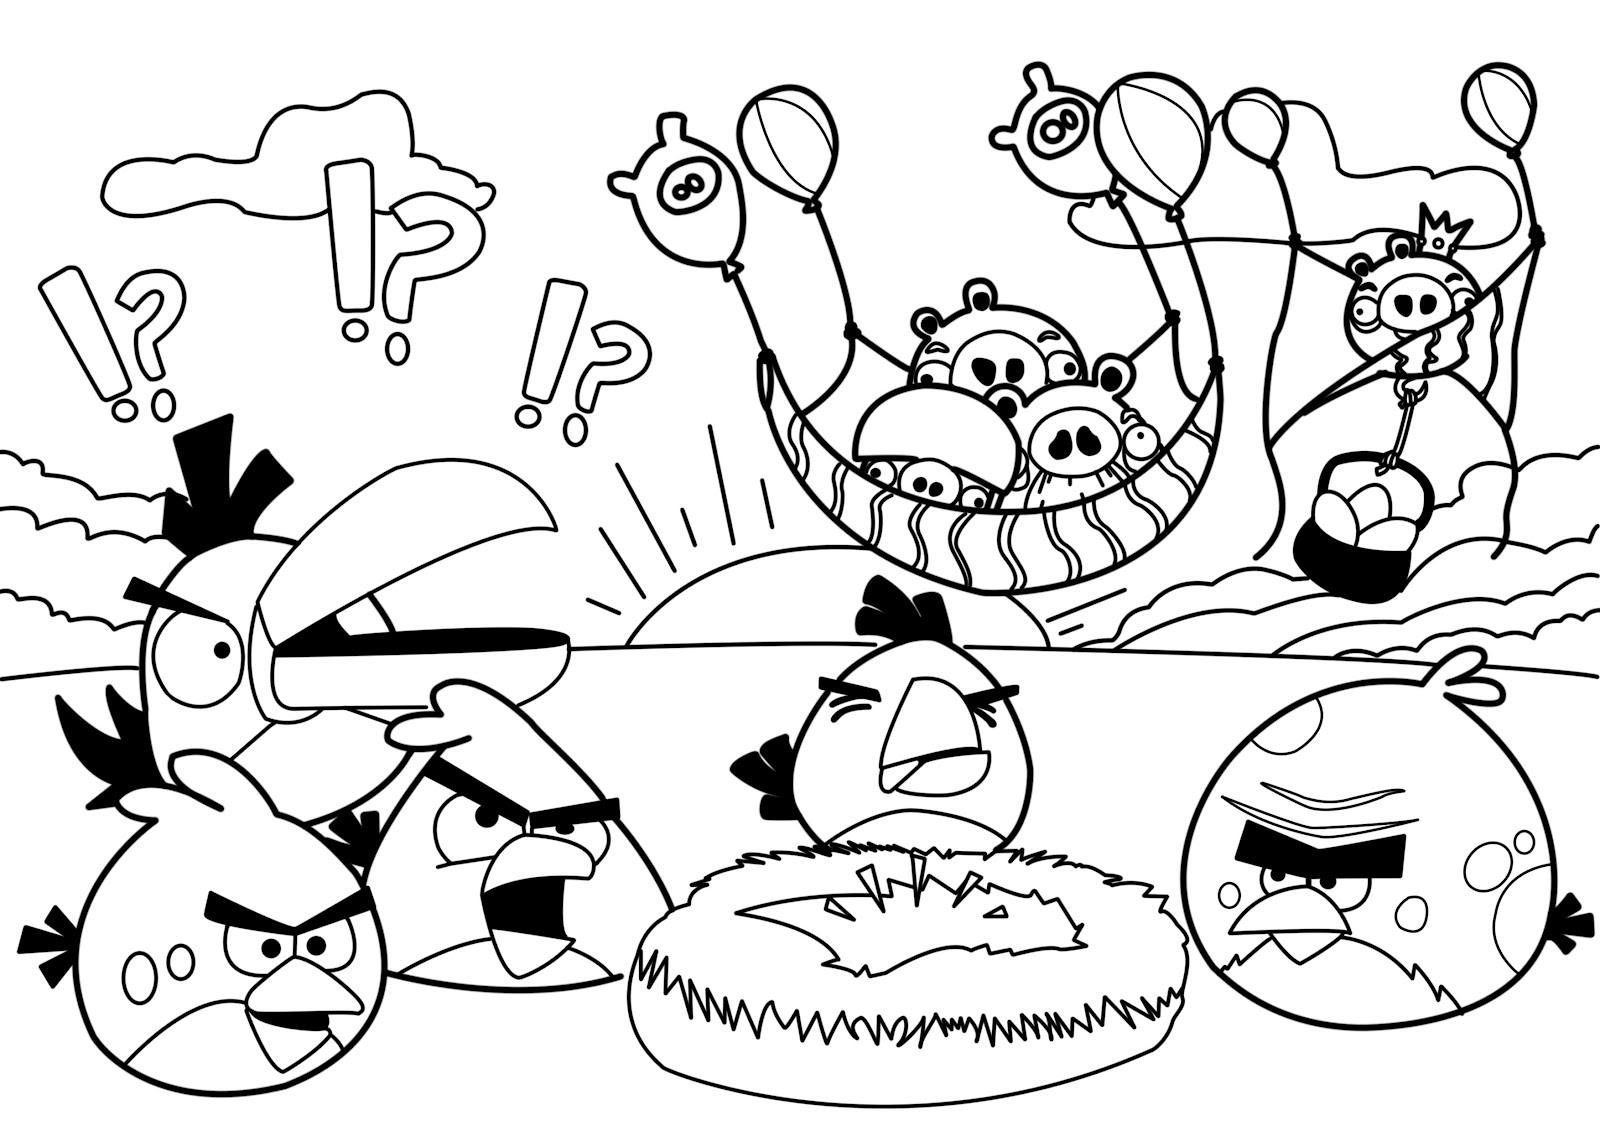  Party Angry Birds Coloring pages